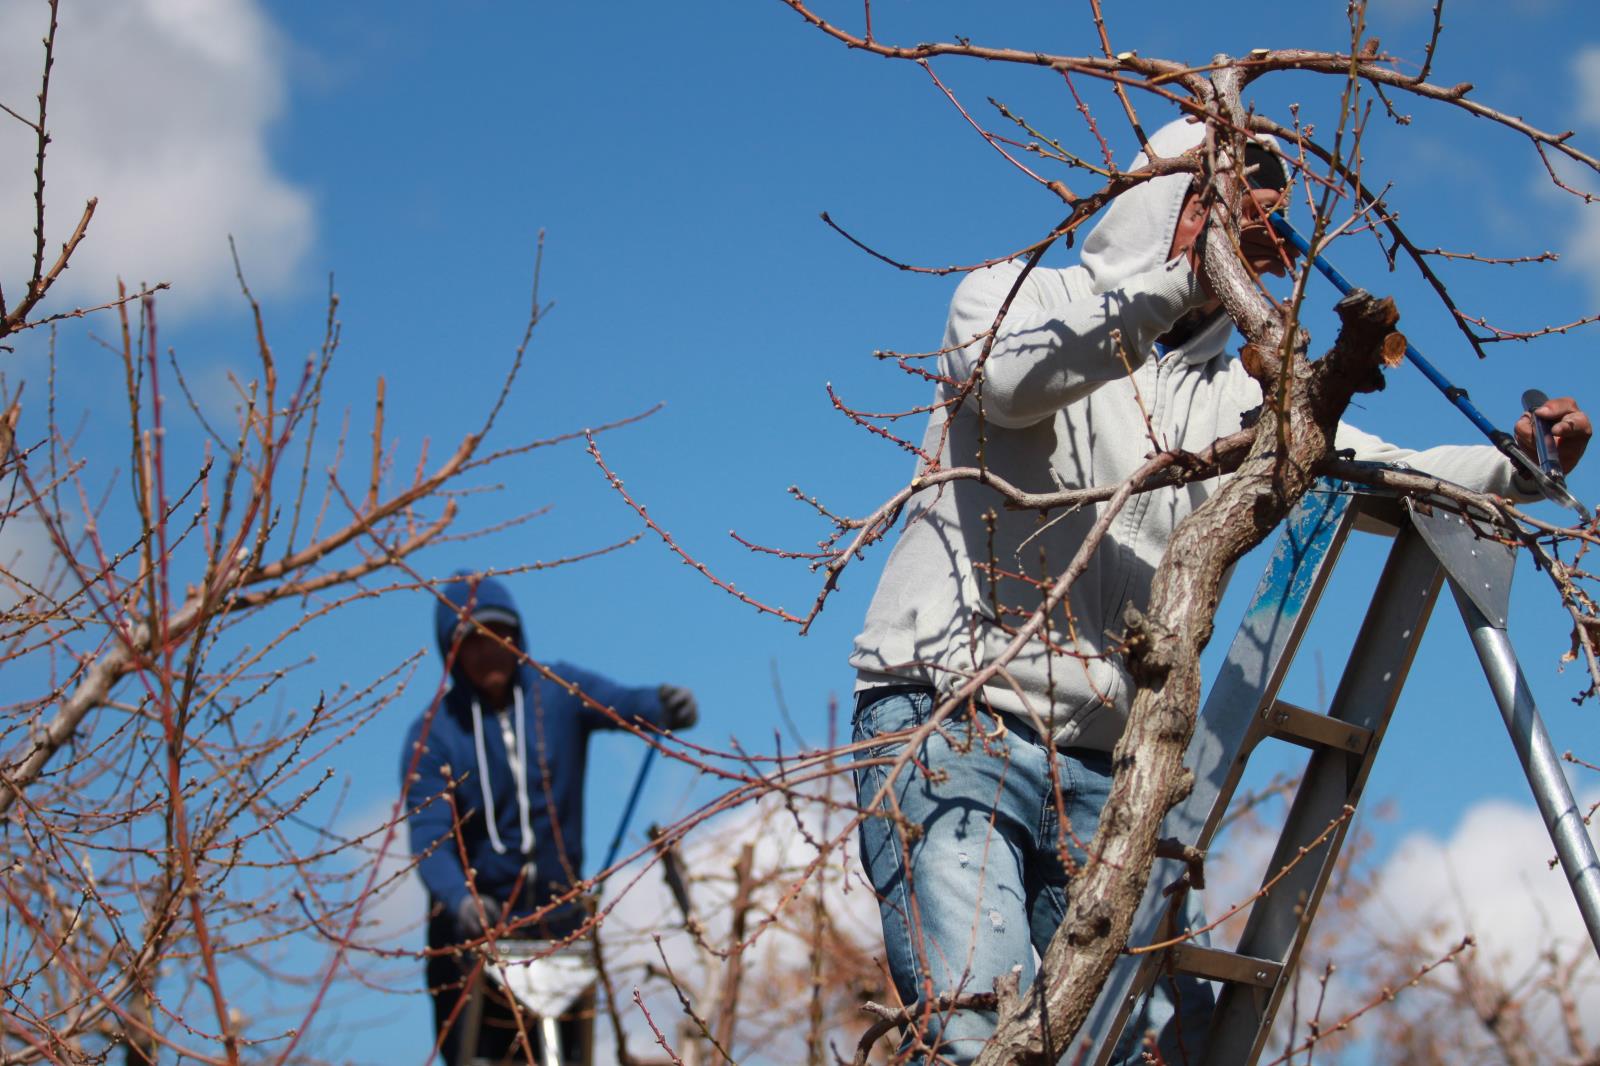 Farm workers prune trees in an orchard near Fruitland in this Idaho Farm Bureau Federation file photo. Nearly 300 agricultural groups from around the nation have signed a letter urging U.S. senators to immediately develop and pass legislation that addresses agricultural labor reform. 